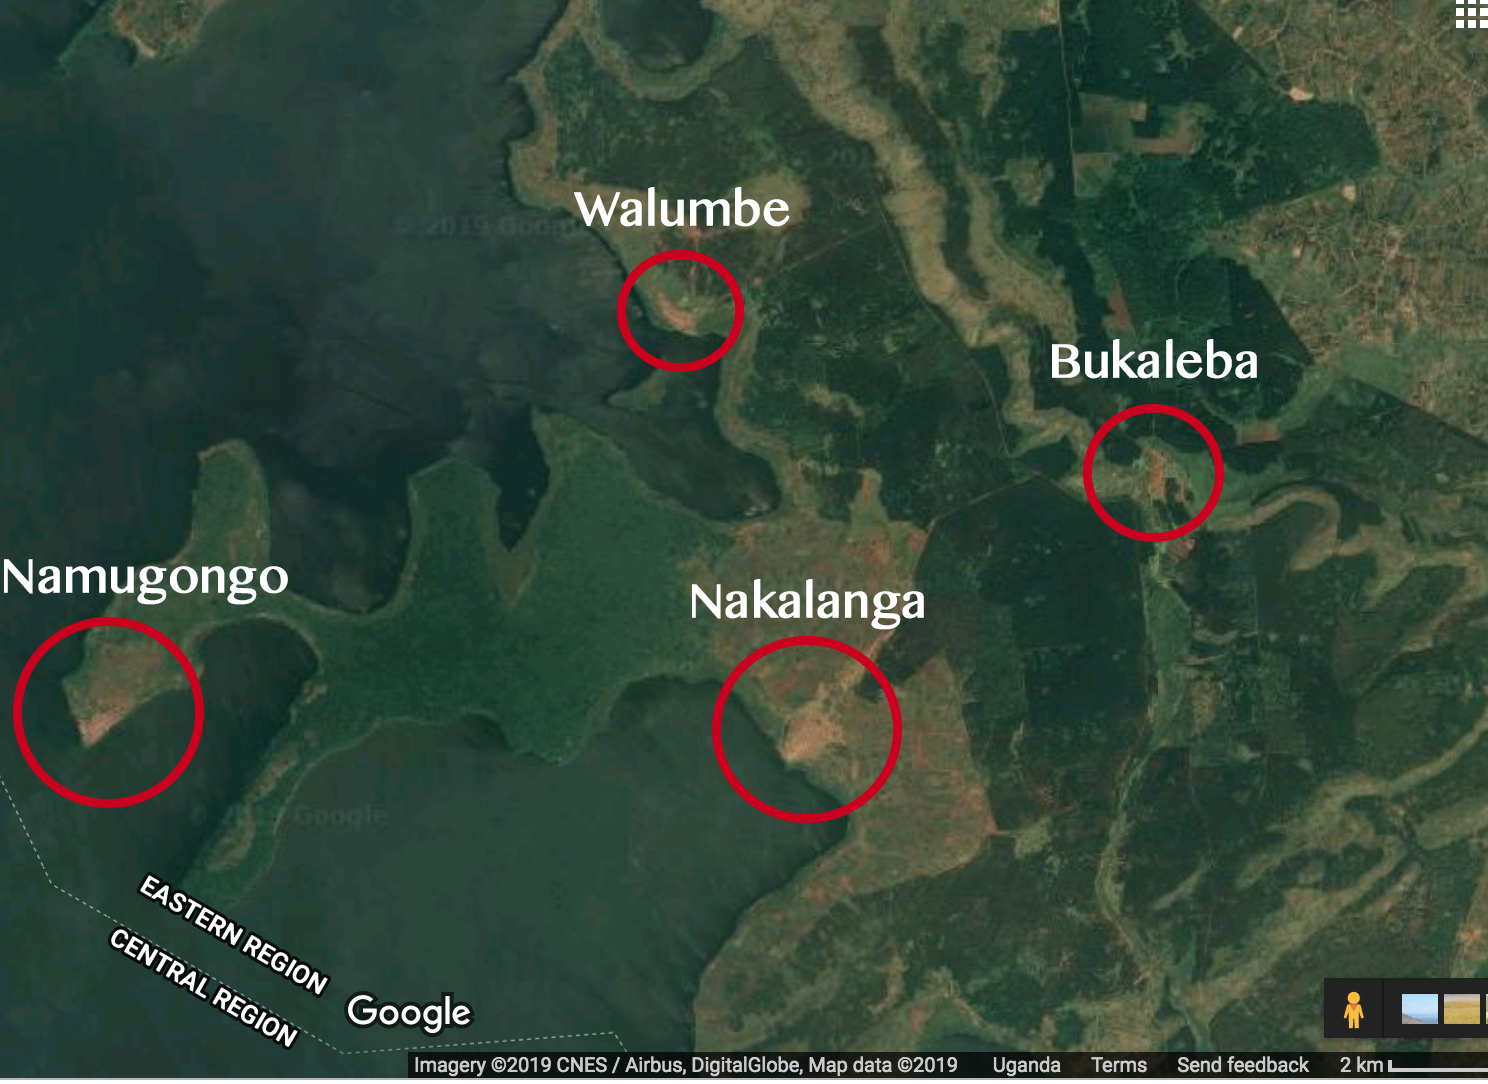 The four villages that exist within Bukaleba Forest Reserve along the shores of Lake Victoria. Source: Google Maps. Image courtesy of InfoNile.